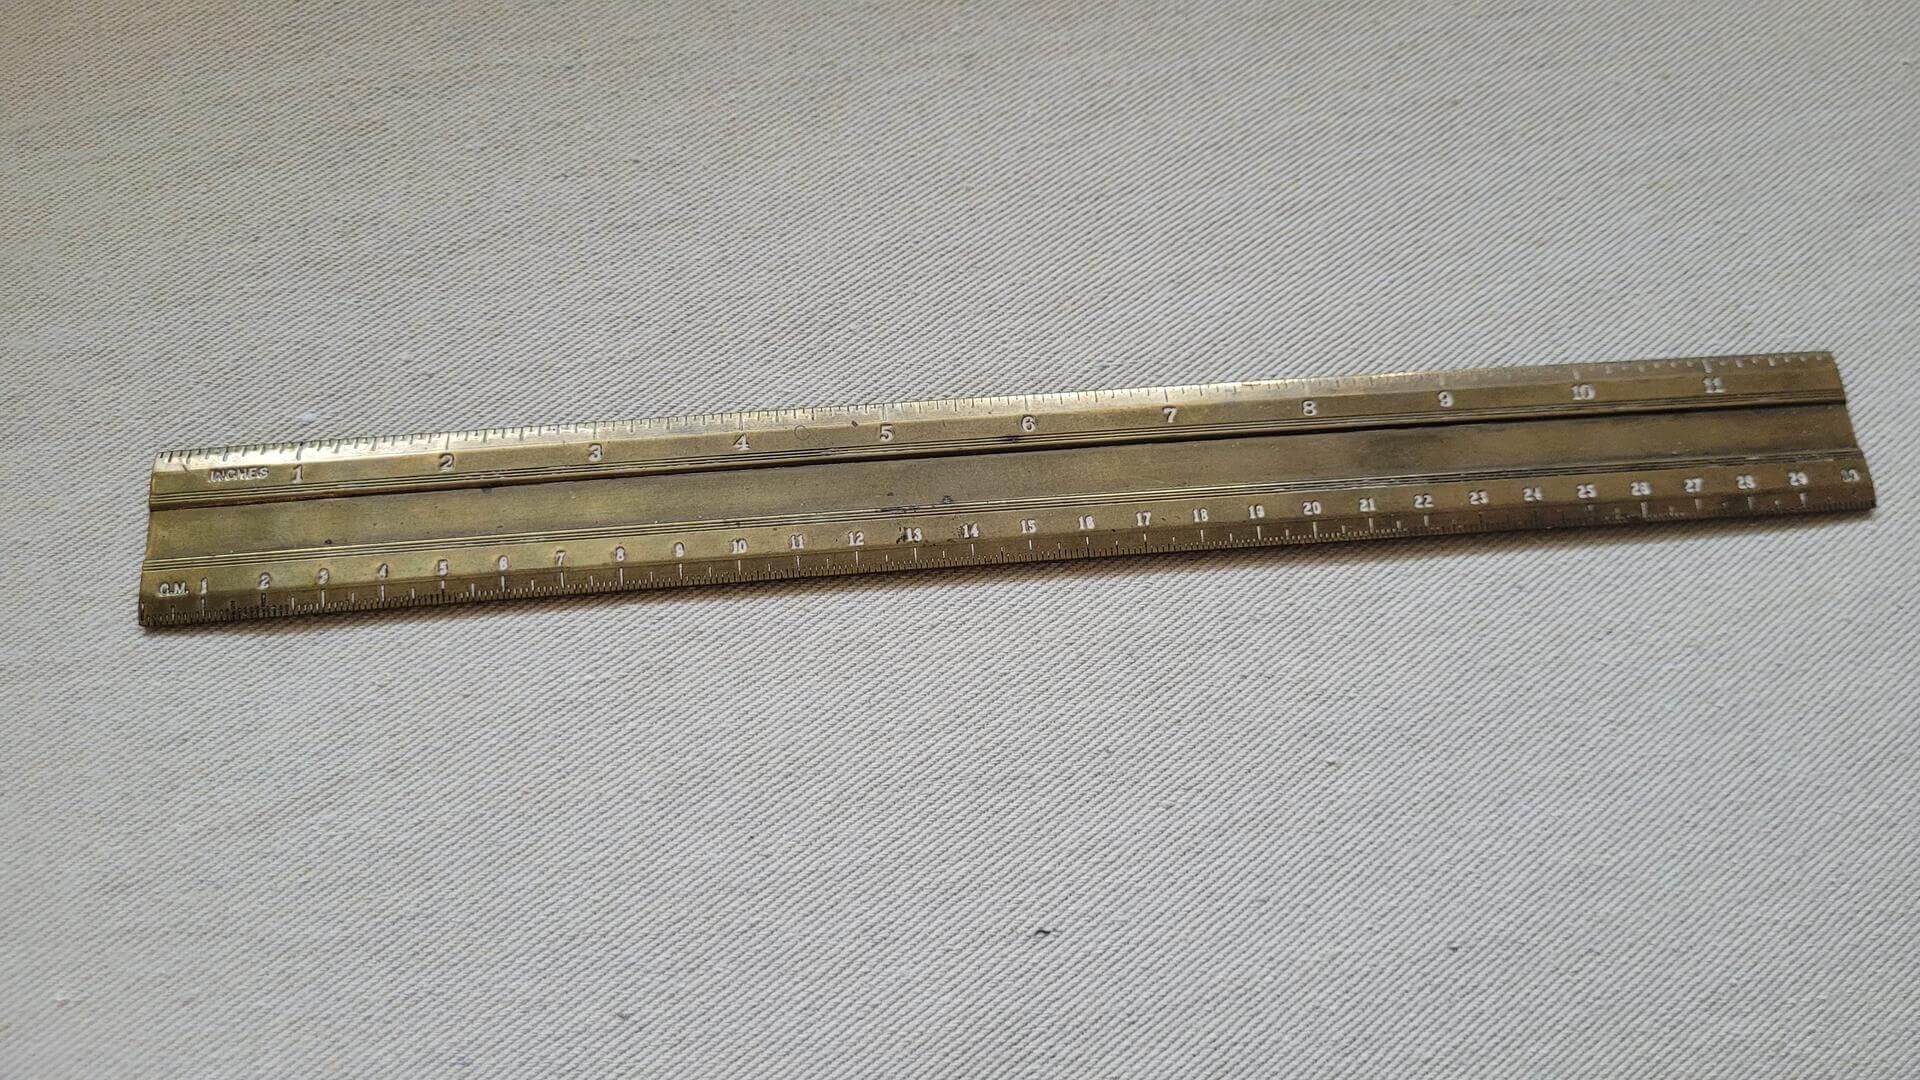 Vintage Twelve Inches Brass Ruler with White Etched Imperial & Metric Units - Antique Collectible Office Equipment and Marking & Measuring Tools